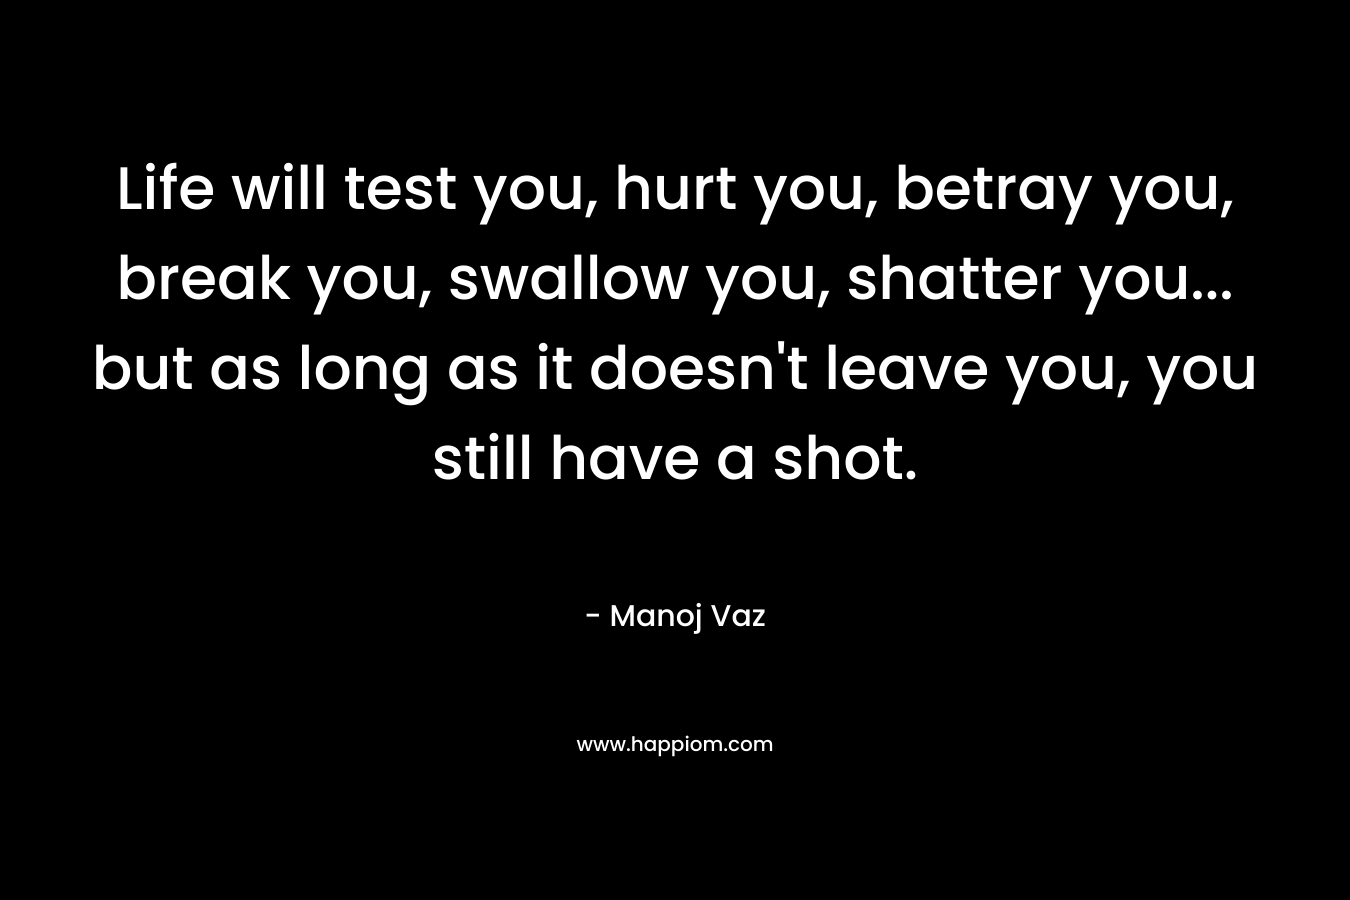 Life will test you, hurt you, betray you, break you, swallow you, shatter you... but as long as it doesn't leave you, you still have a shot.